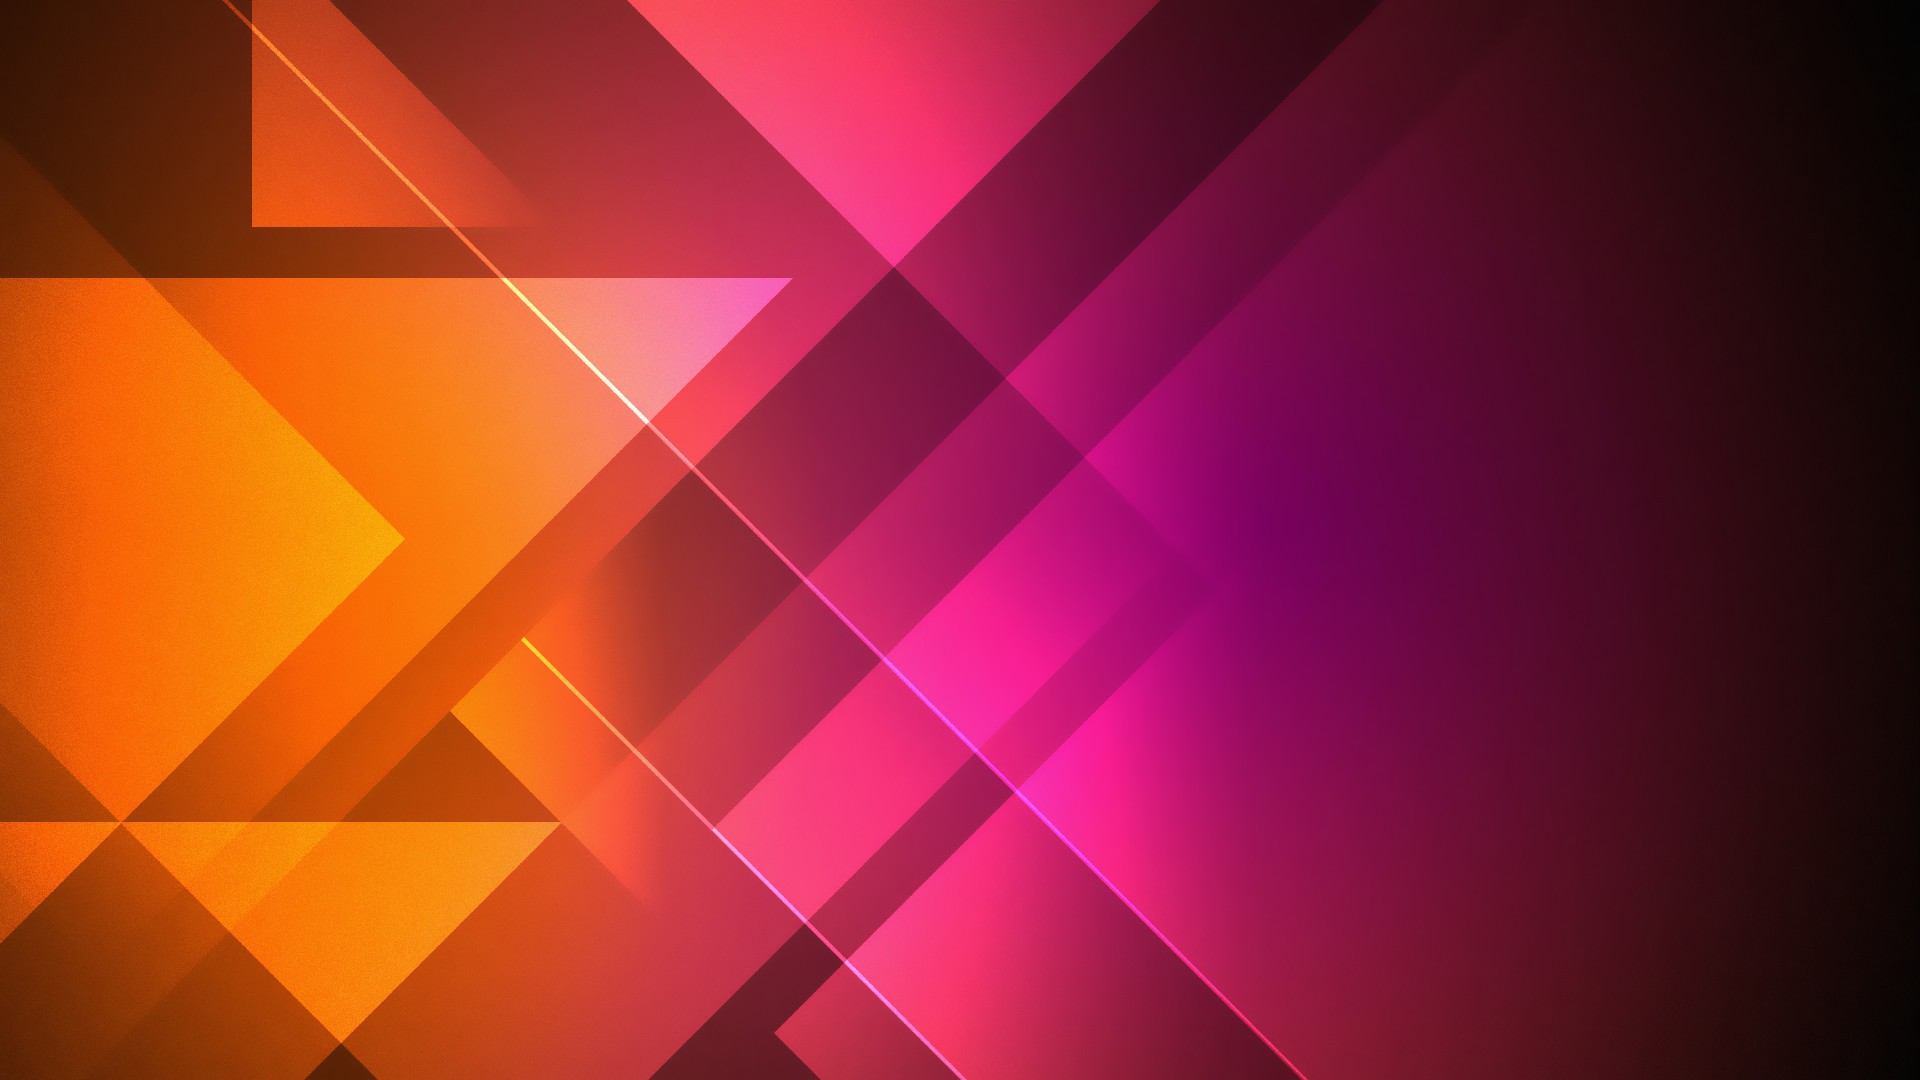 Geometric Desktop Wallpaper with high-resolution 1920x1080 pixel. You can use this wallpaper for your Windows and Mac OS computers as well as your Android and iPhone smartphones